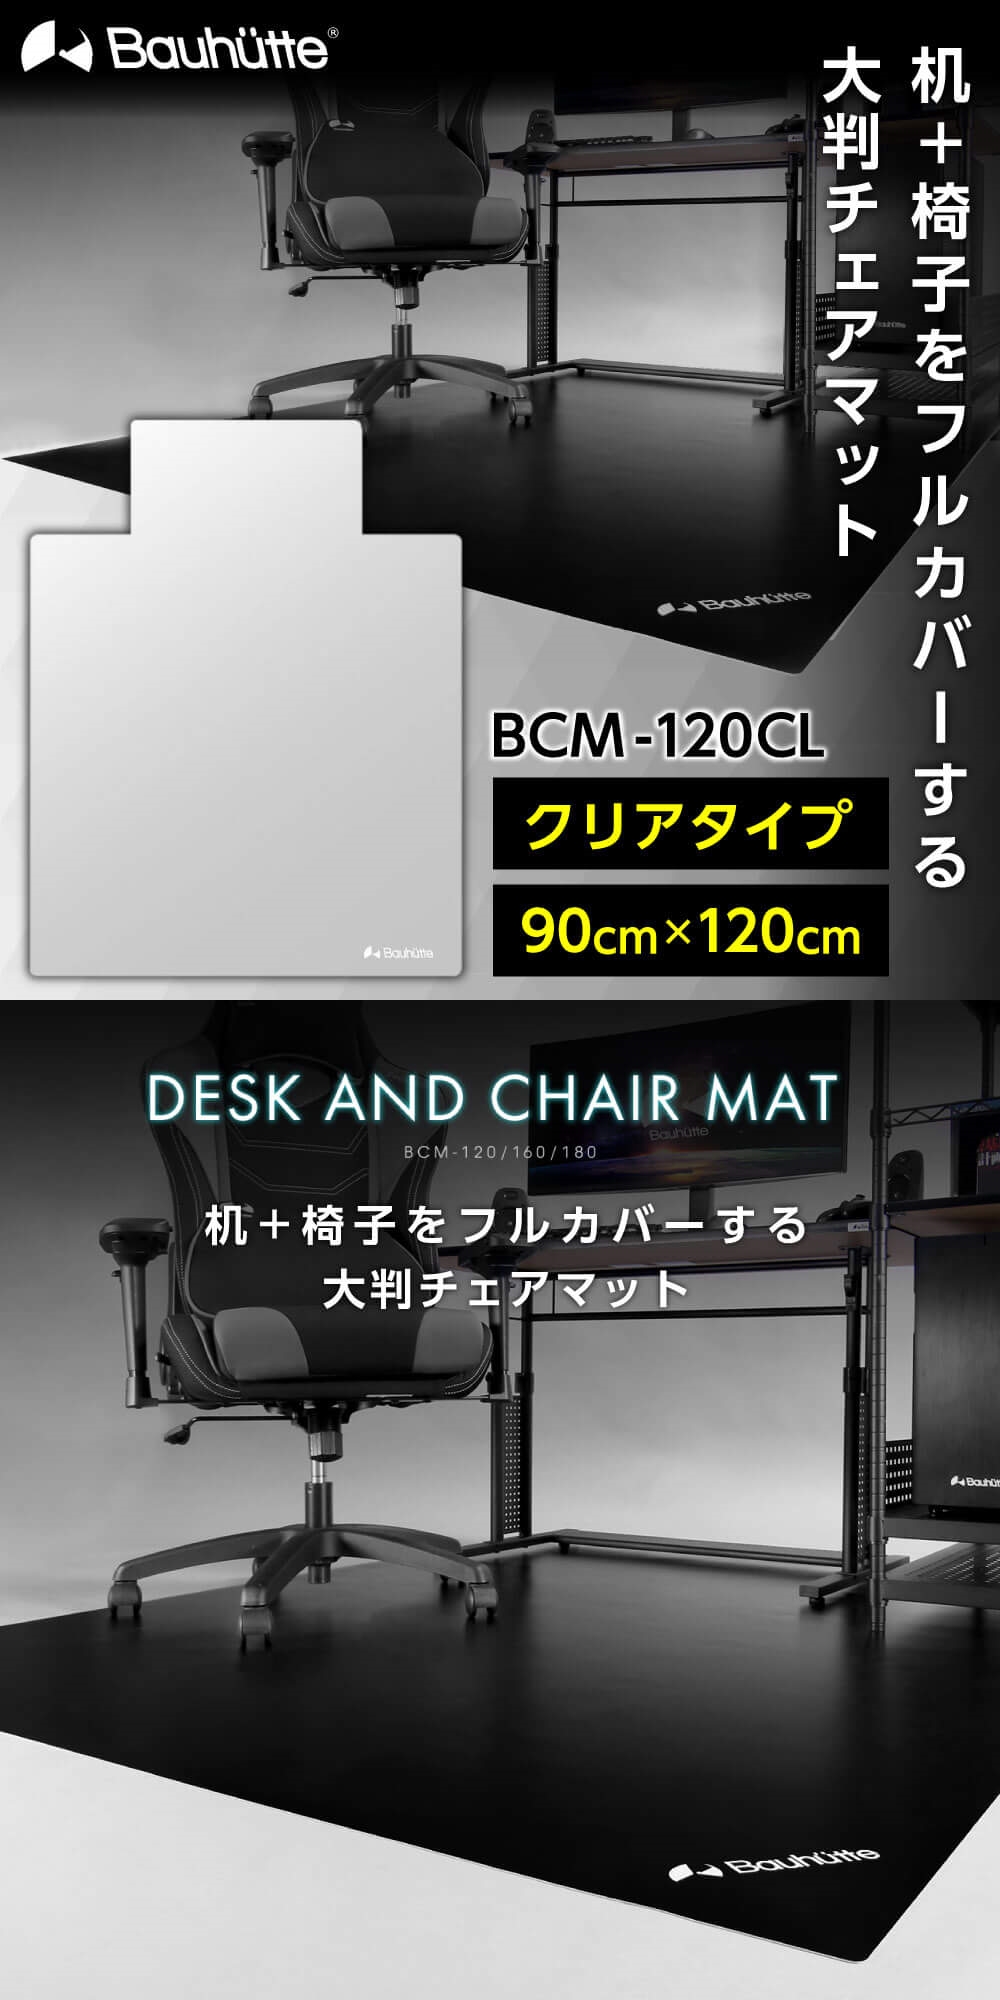 Bauhutteデスクごとチェアマット160×130 クリア BCM-160CL 海外輸入 